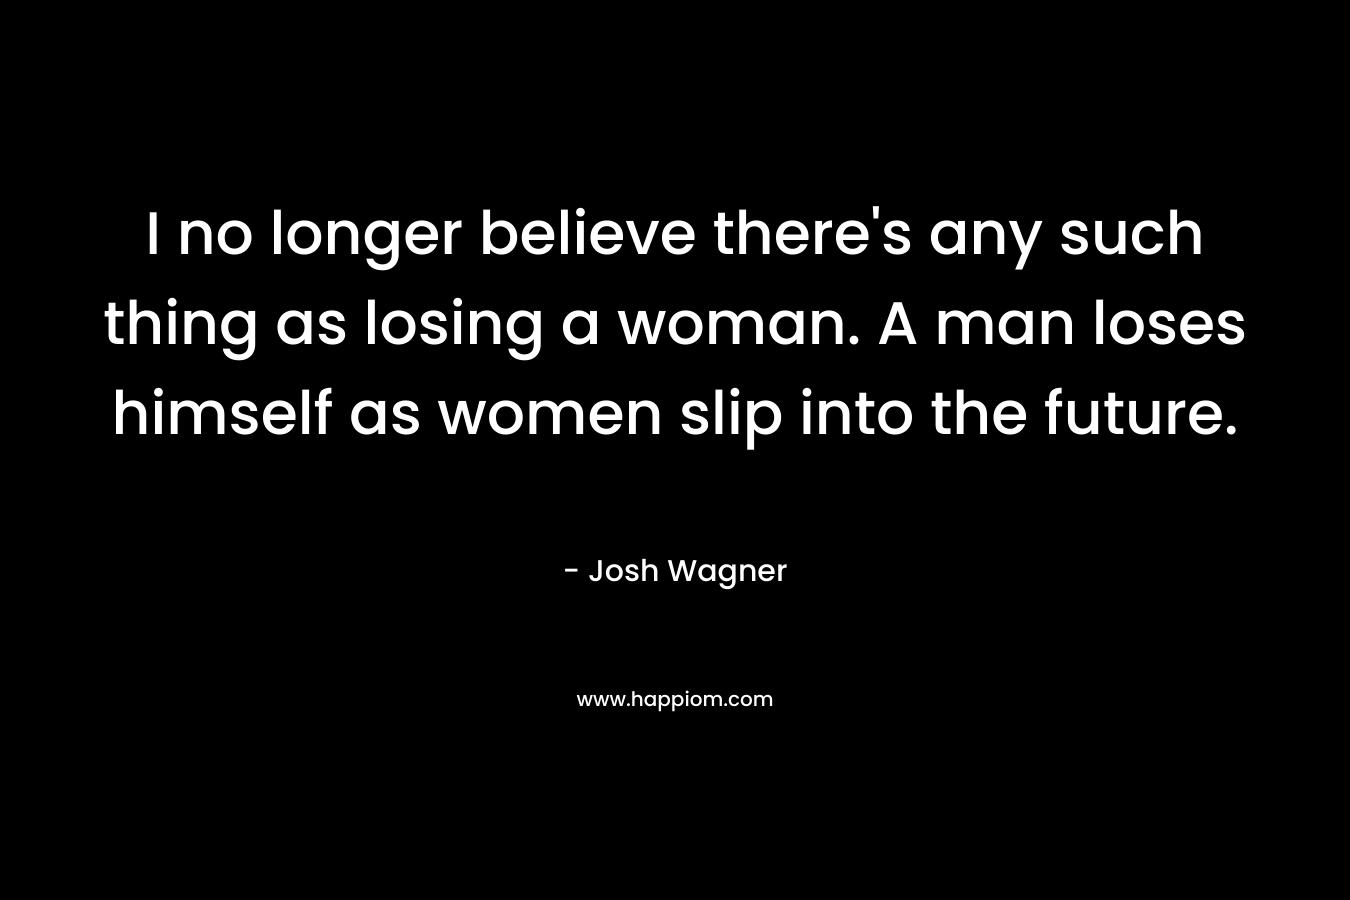 I no longer believe there's any such thing as losing a woman. A man loses himself as women slip into the future.